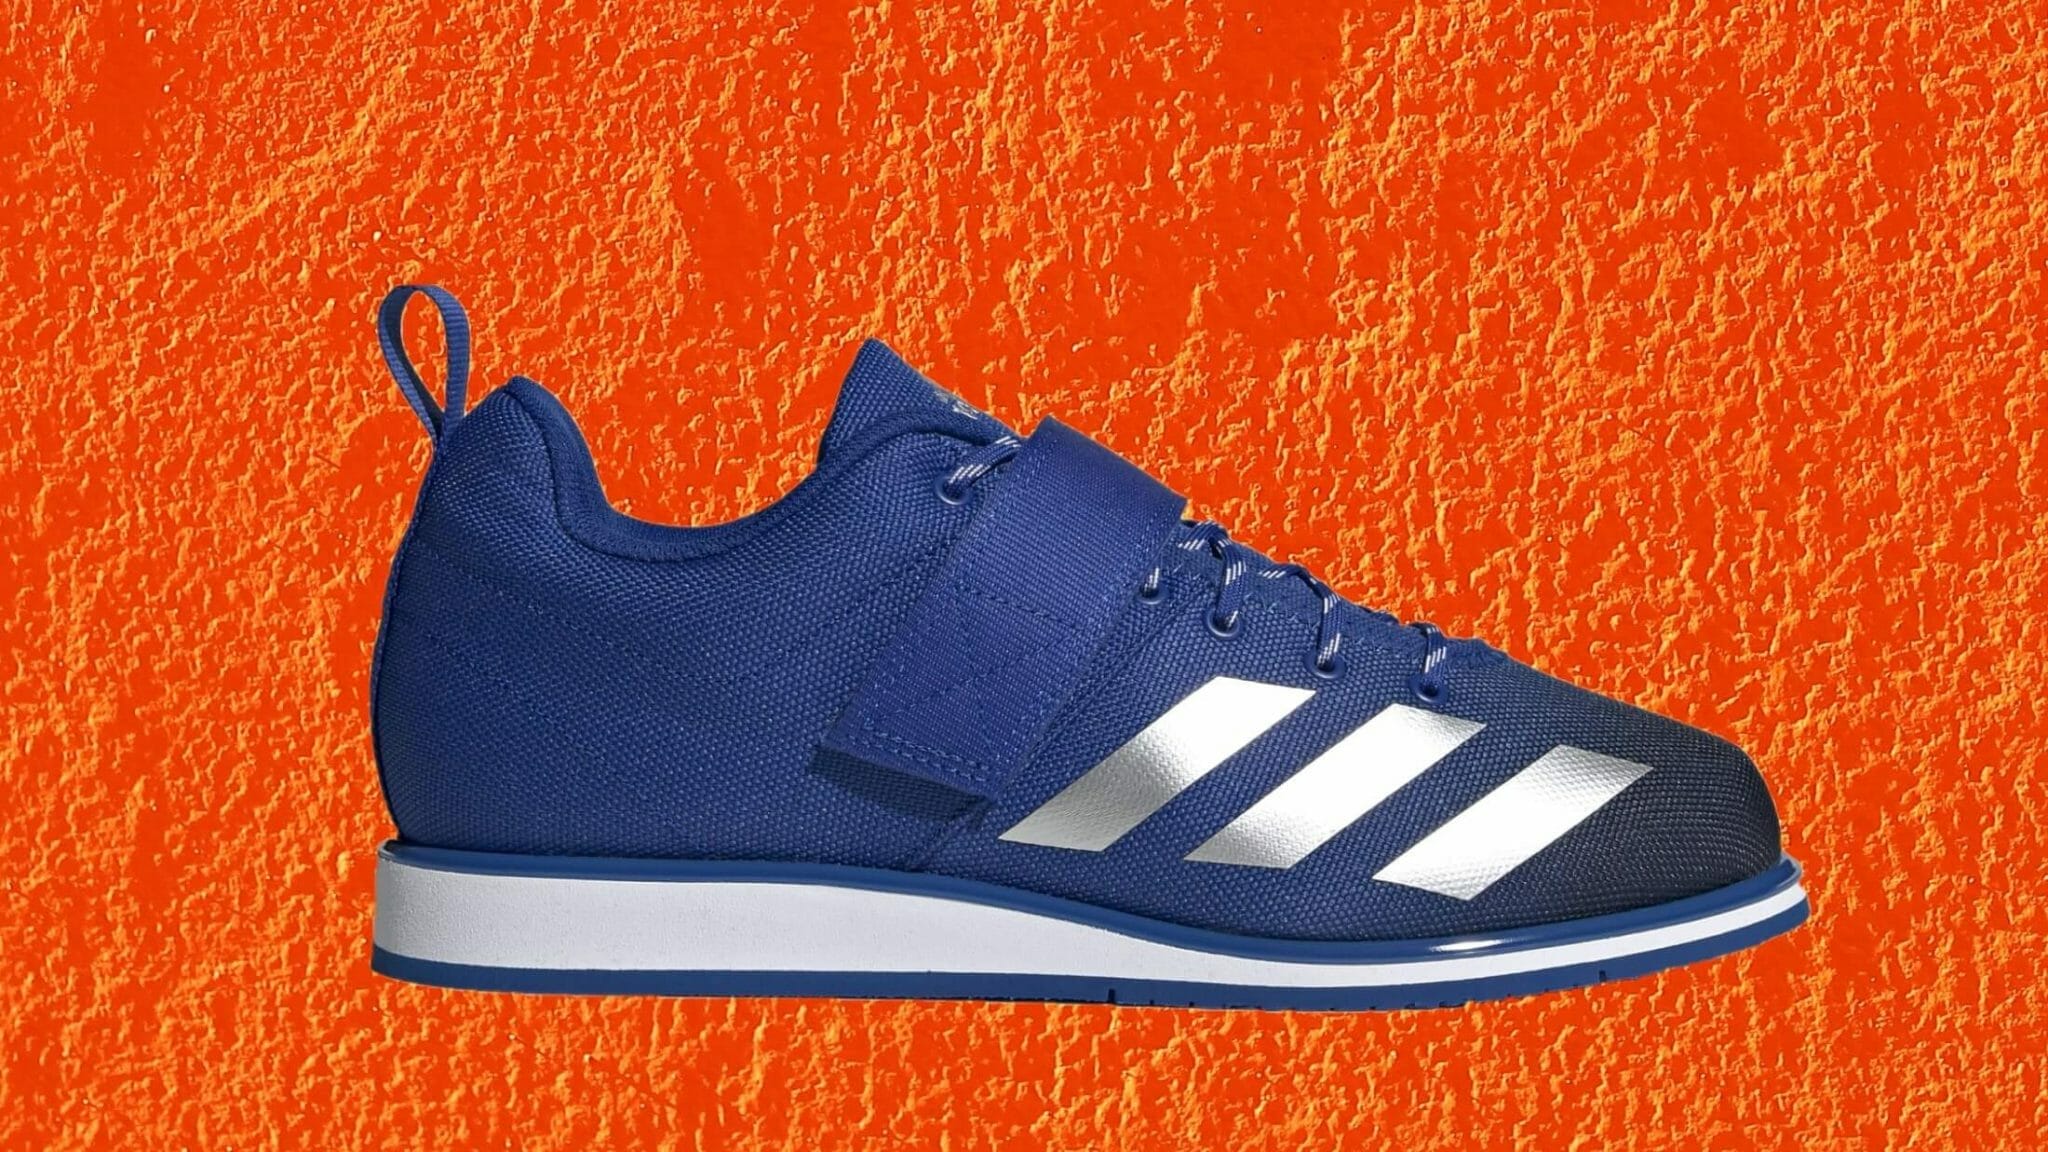 adidas Powerlift blue and silver metallic on orange background. Formerly known as the Powerlift 4.